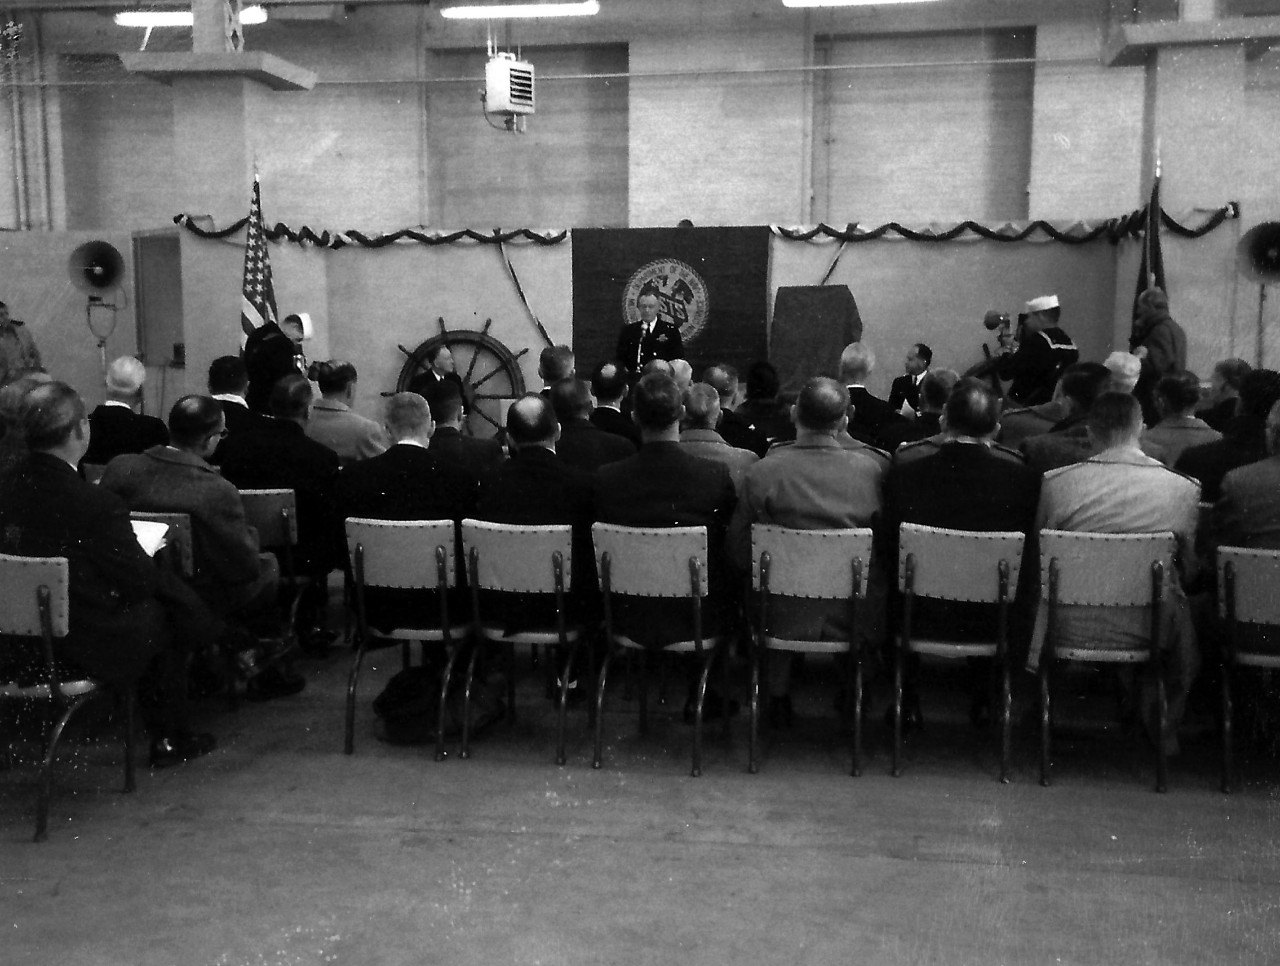 NMUSN-18:   USNS James M. Gilliss presentation at Naval Historical Display Center, Washington Navy Yard, Washington, D.C. December 14, 1962.    Rear Admiral Edward C. Stephan, USNR, gives remarks during the presentation at the Naval Historical Display Center (now the National Museum of the U.S. Navy).    This presentation was the first official ceremony held at the Display Center.   Rear Admiral Arthur R. Gralla and Captain Slade D. Cutter are to the right.  This presentation was the first official ceremony held at the Display Center.     The director at the time was World War II veteran, Captain Slade. D. Cutter, USN.  National Museum of the U.S. Navy Photograph Collection.    